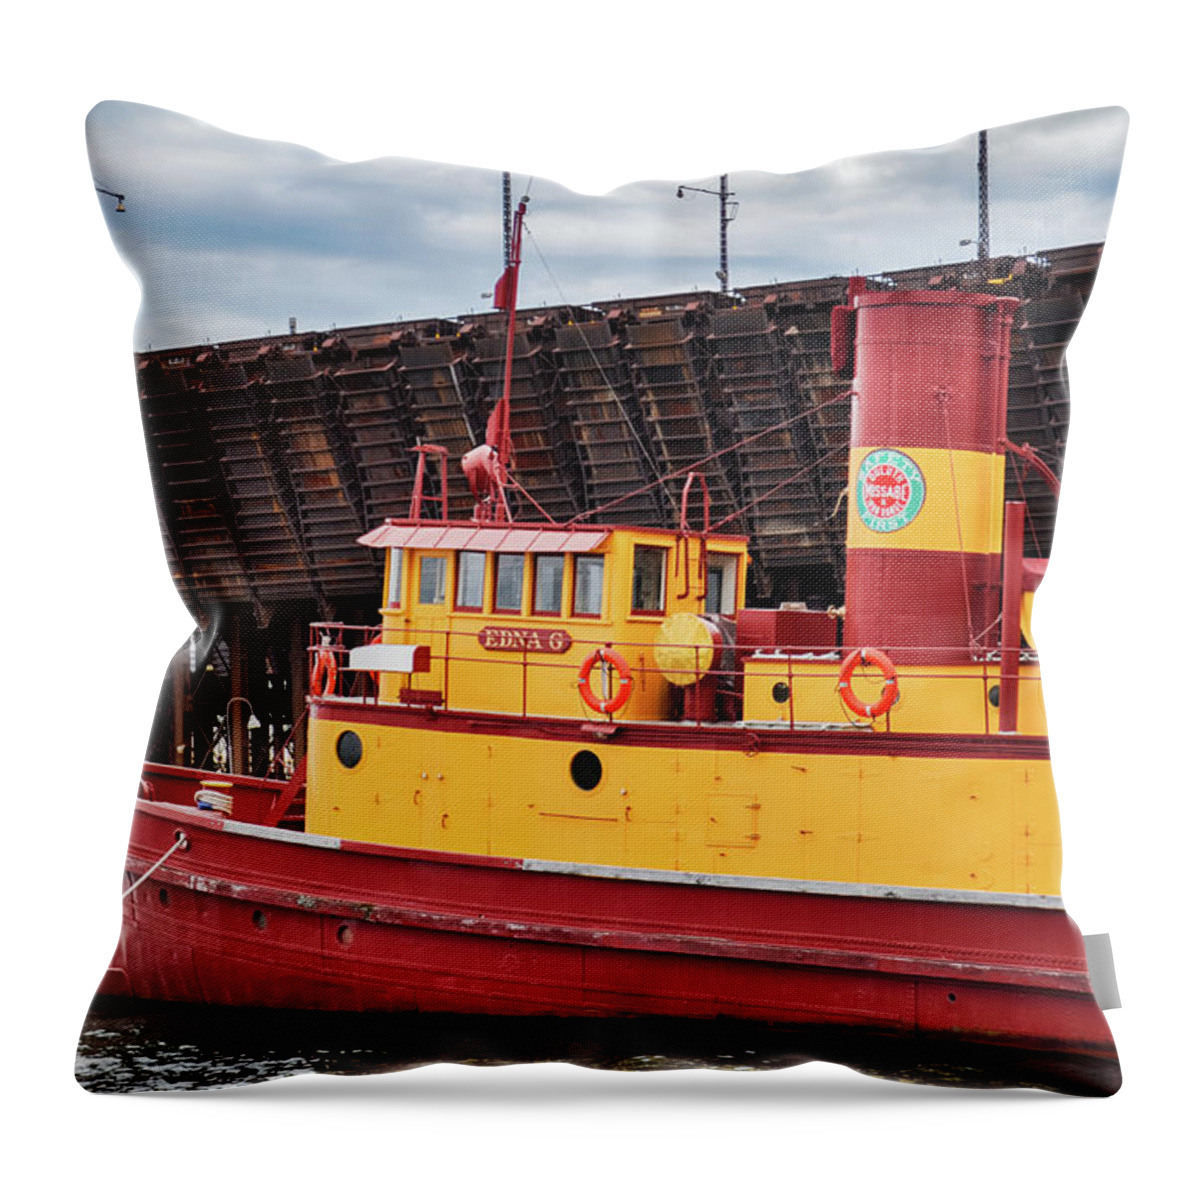 Duluth Throw Pillow featuring the photograph Edna G Tugboat Lake Superior by Kyle Hanson